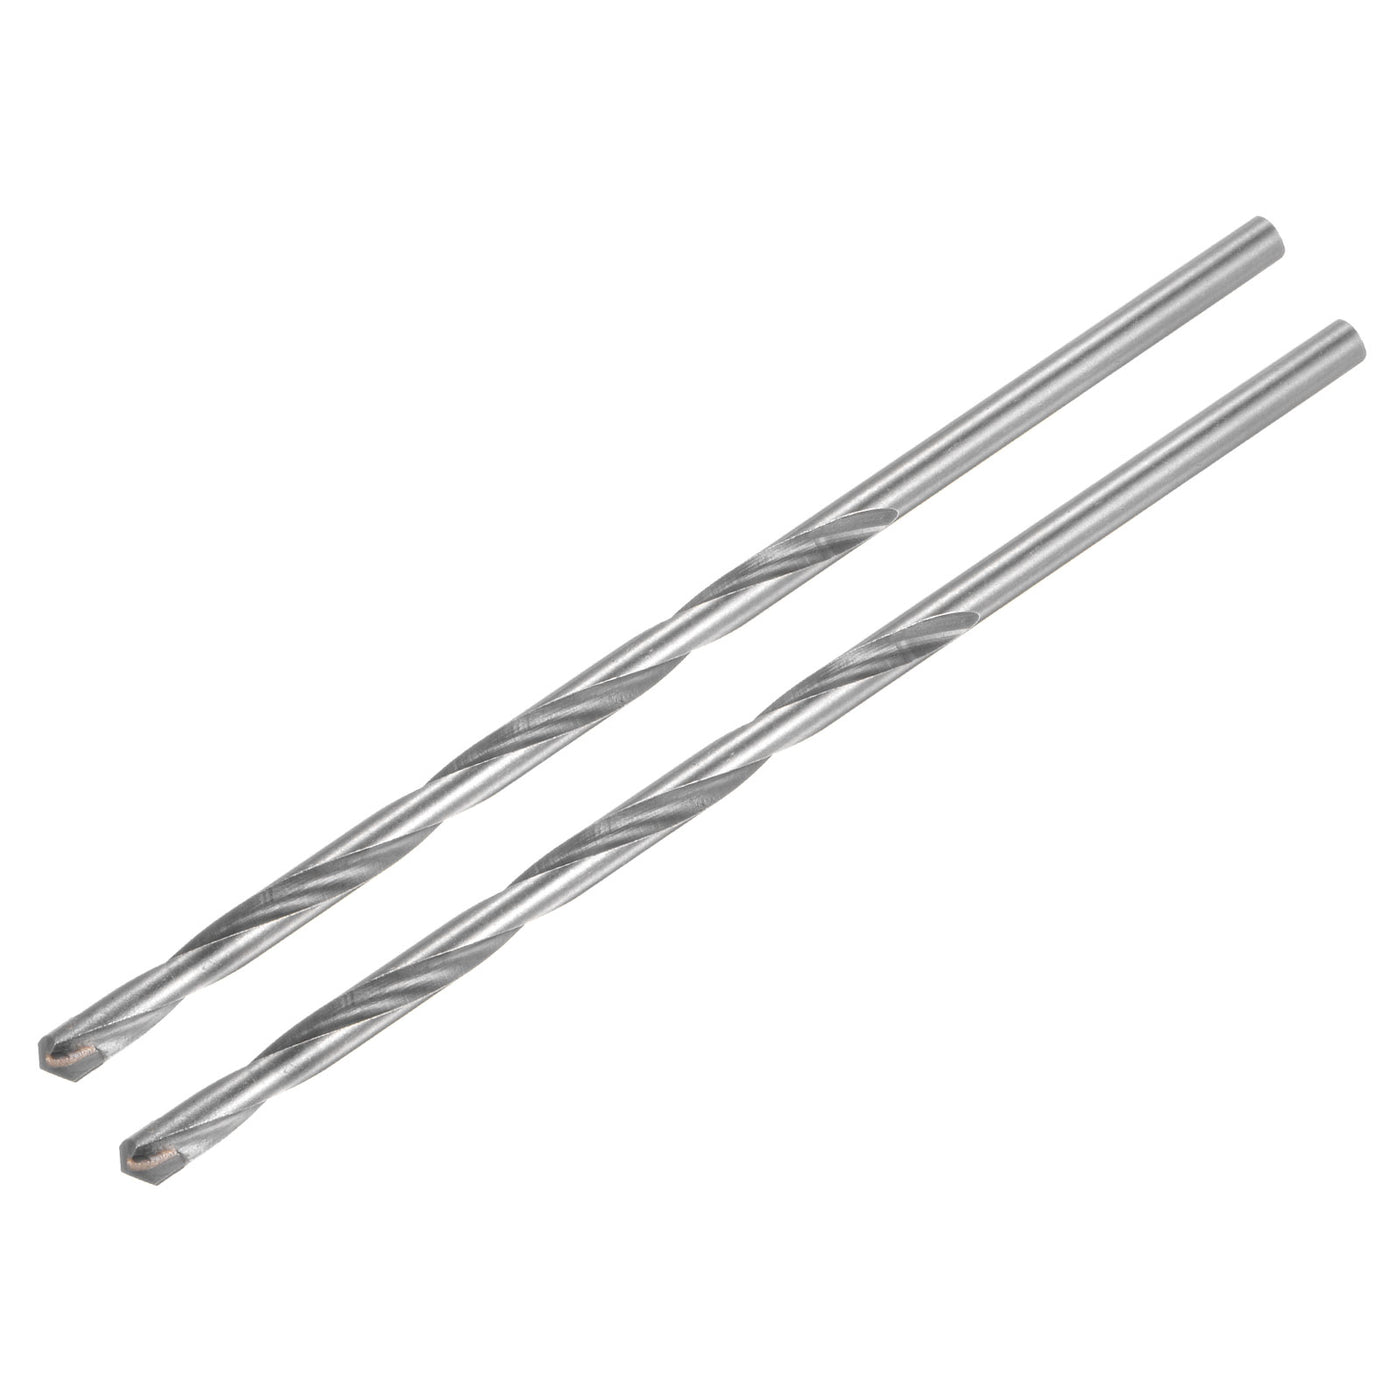 uxcell Uxcell 7mm Cutting Dia Round Shank Cemented Carbide Twist Drill Bit, 200mm Length 2 Pcs